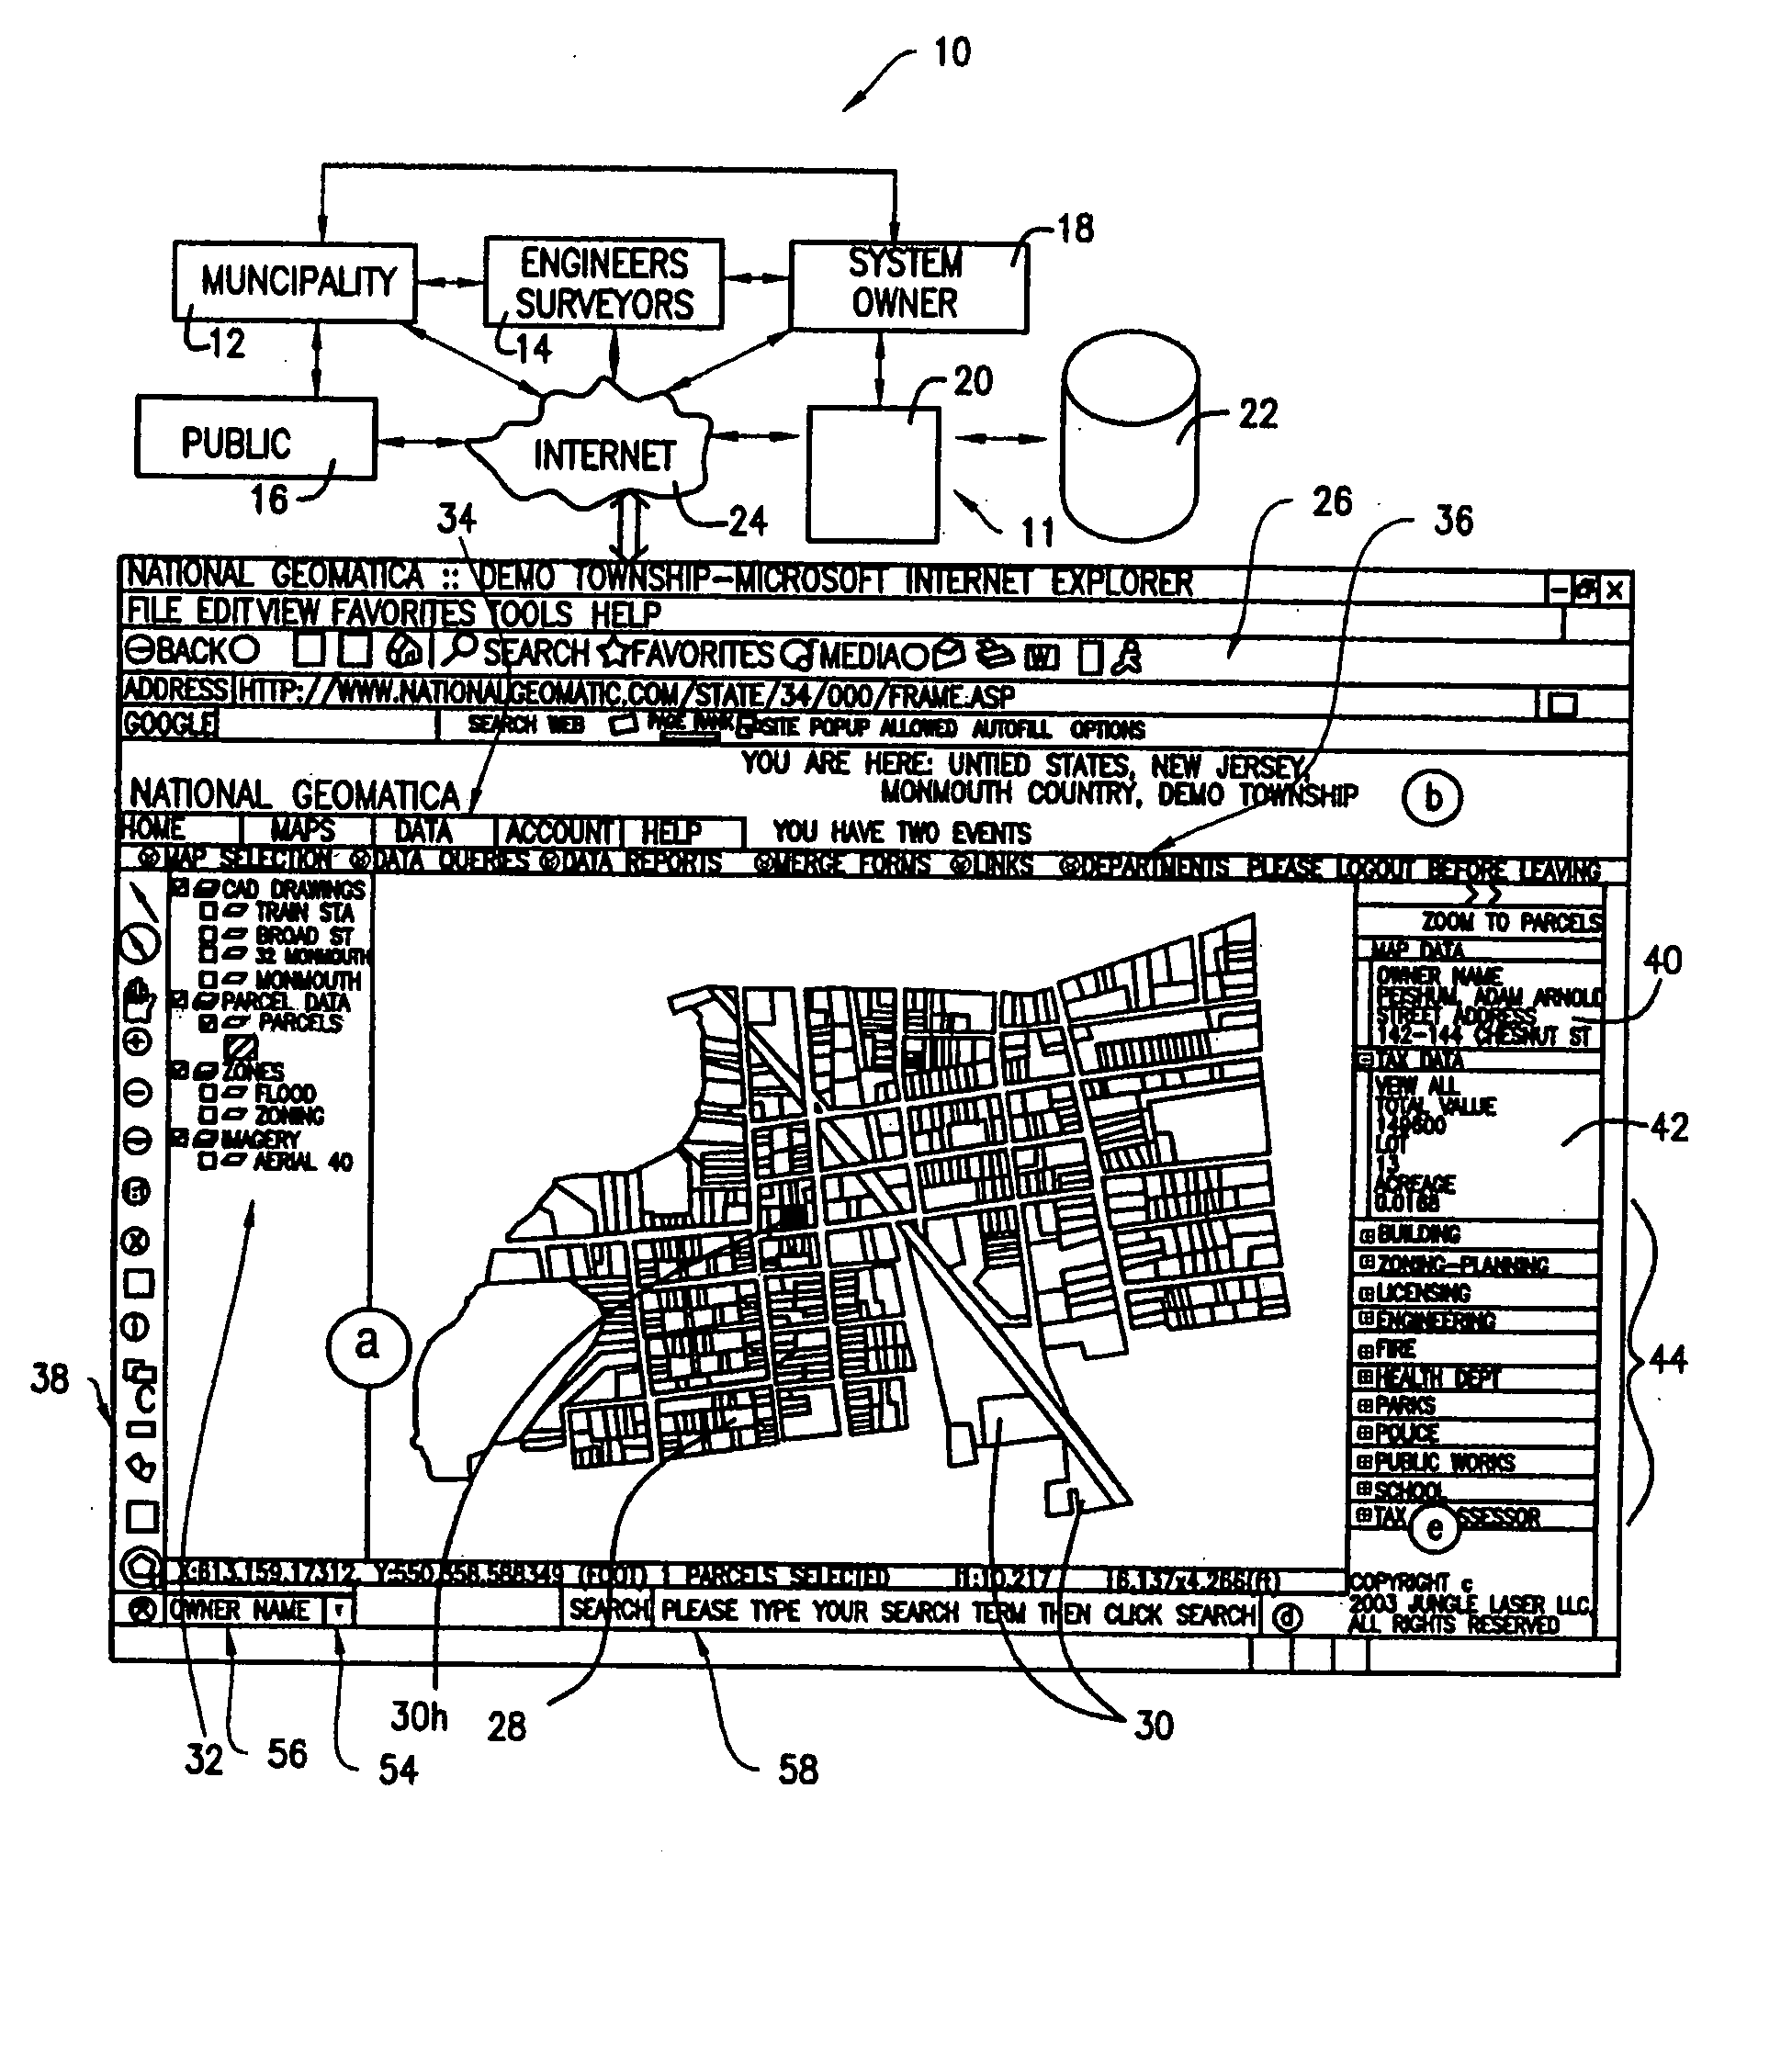 Method and apparatus for creating and maintaining a GIS